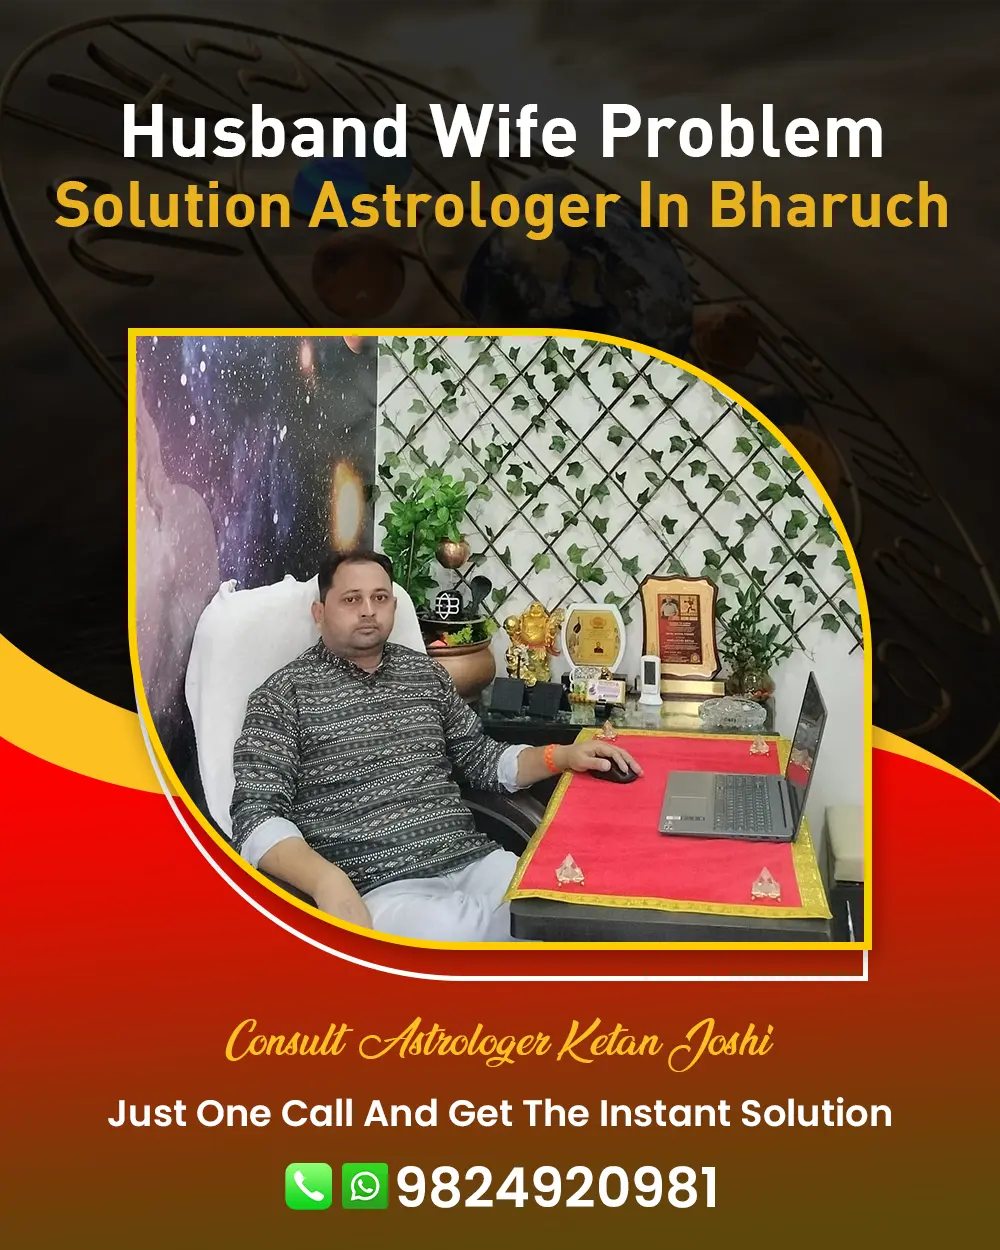 Husband Wife Problem Solution Astrologer In Bharuch